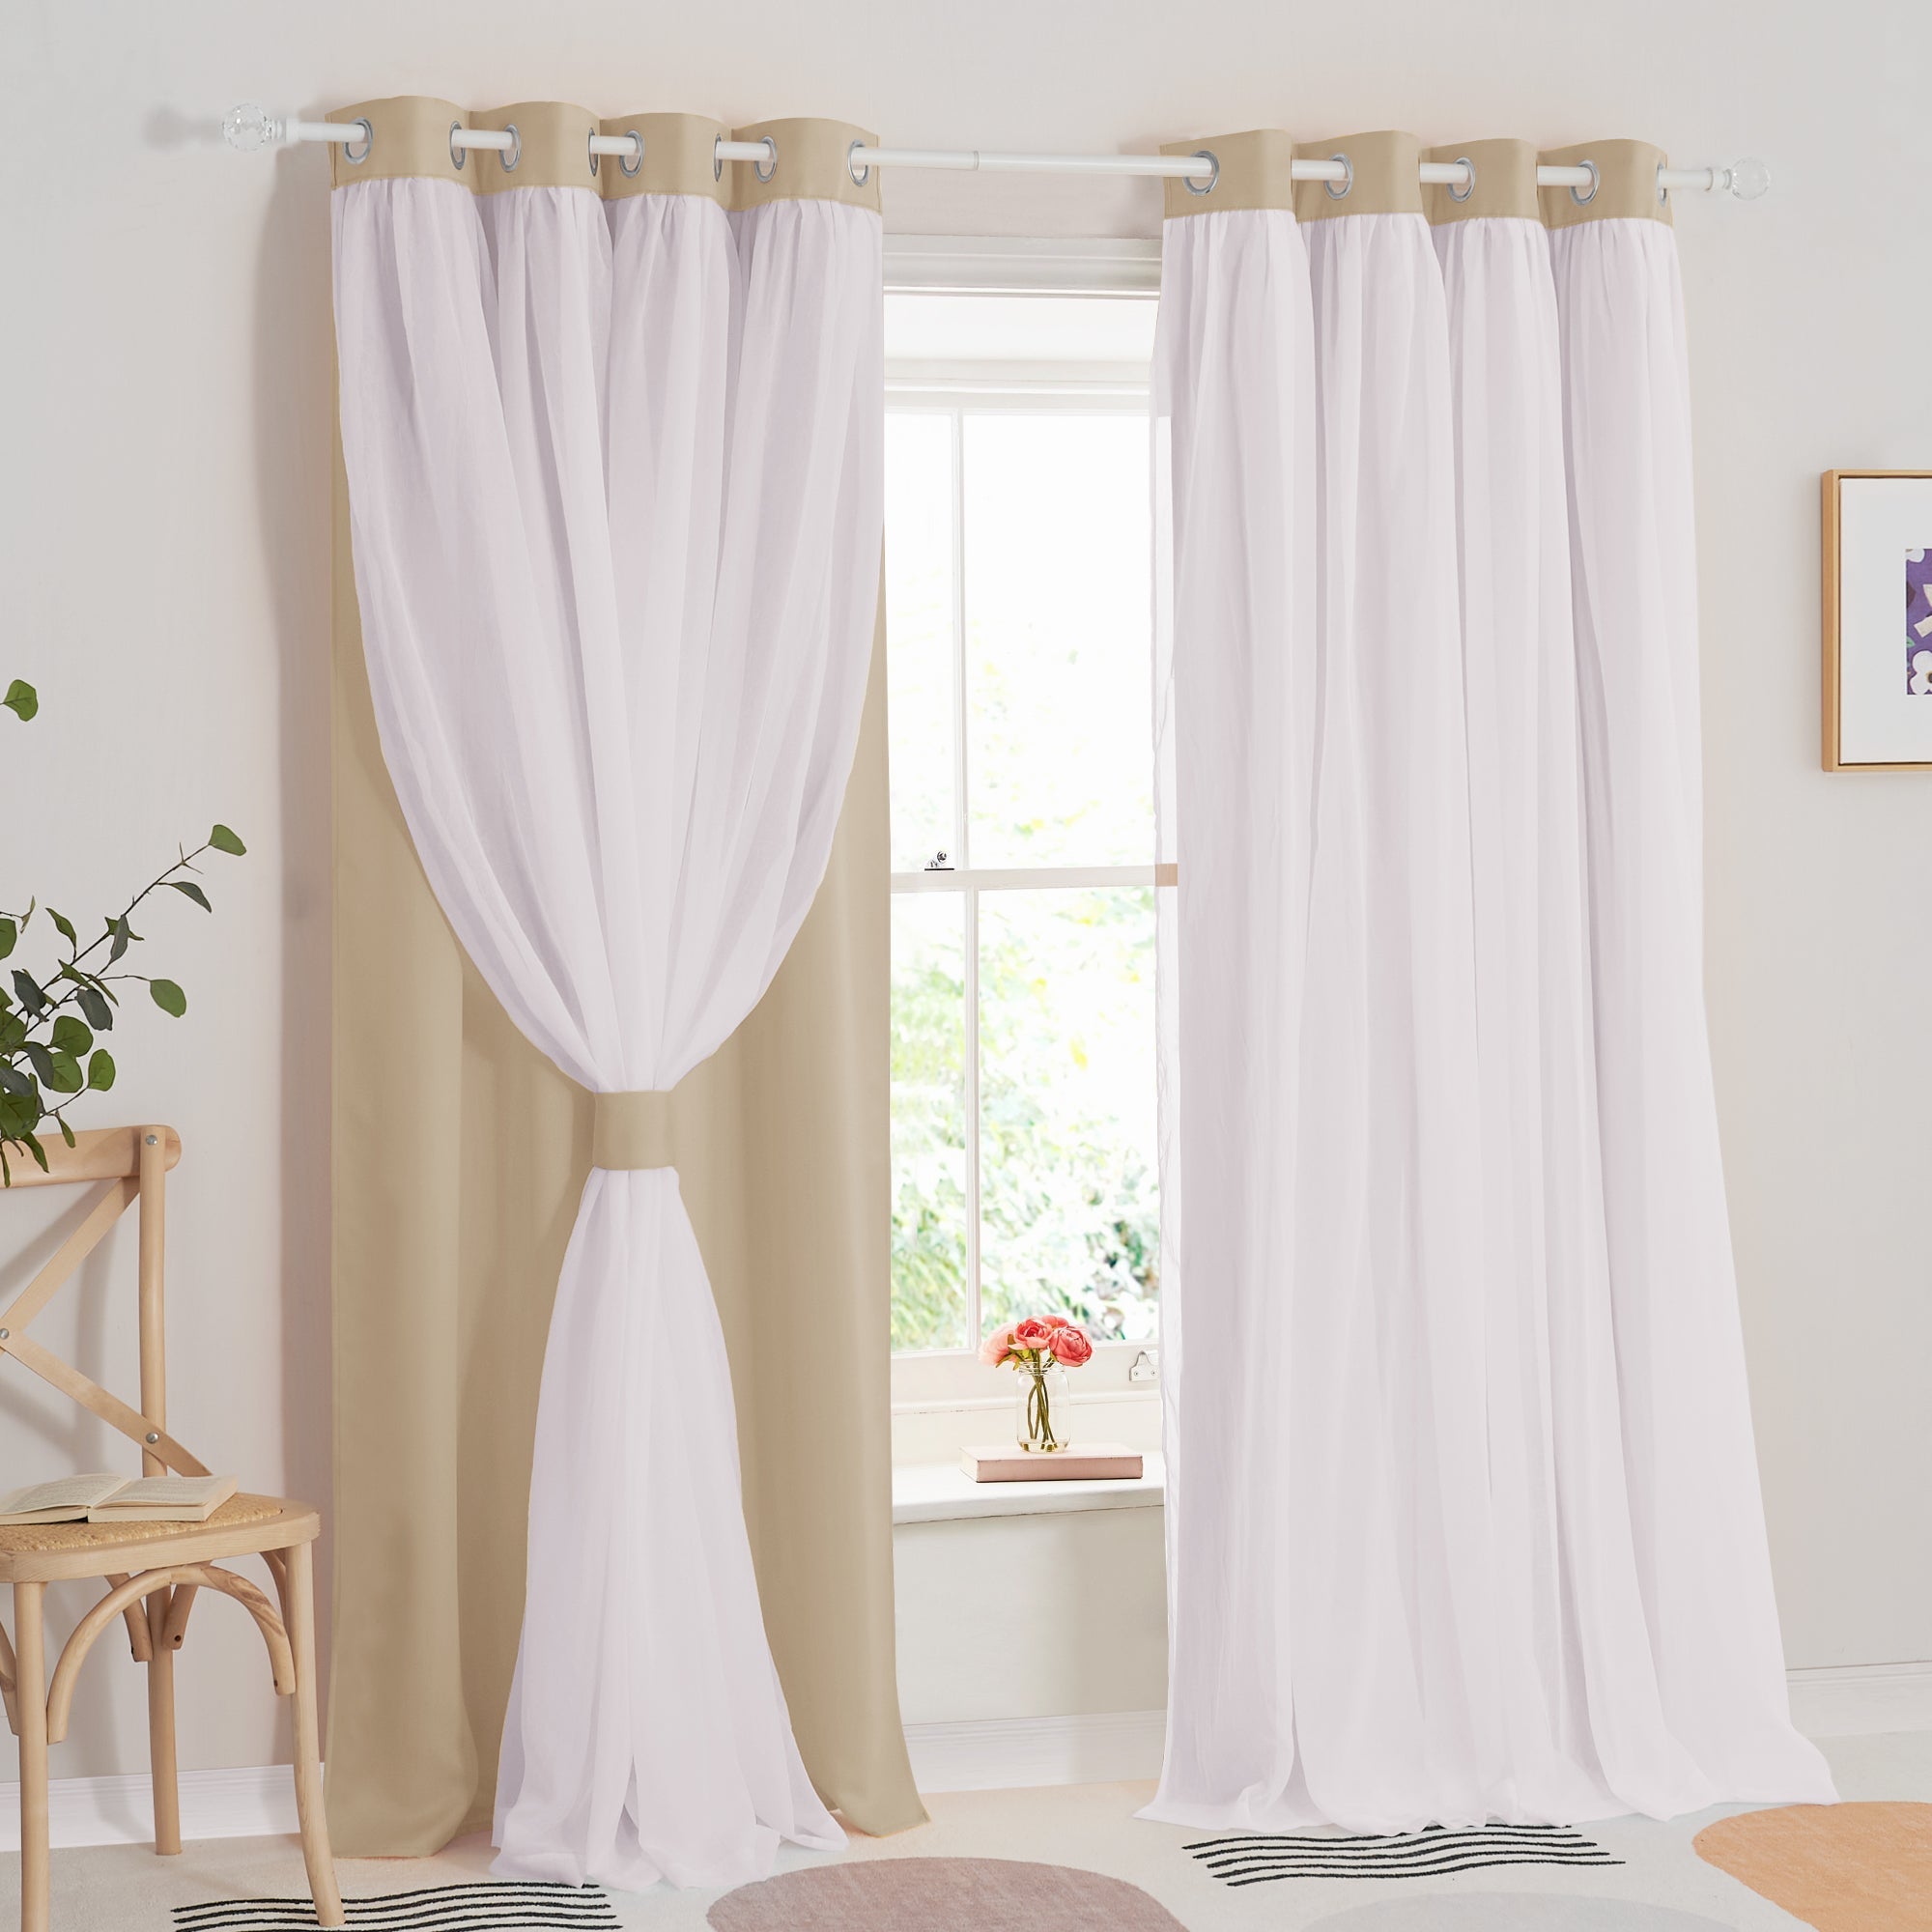 Blackout Curtains With Crushed Voile Sheer Curtain Overlay 1 Panel